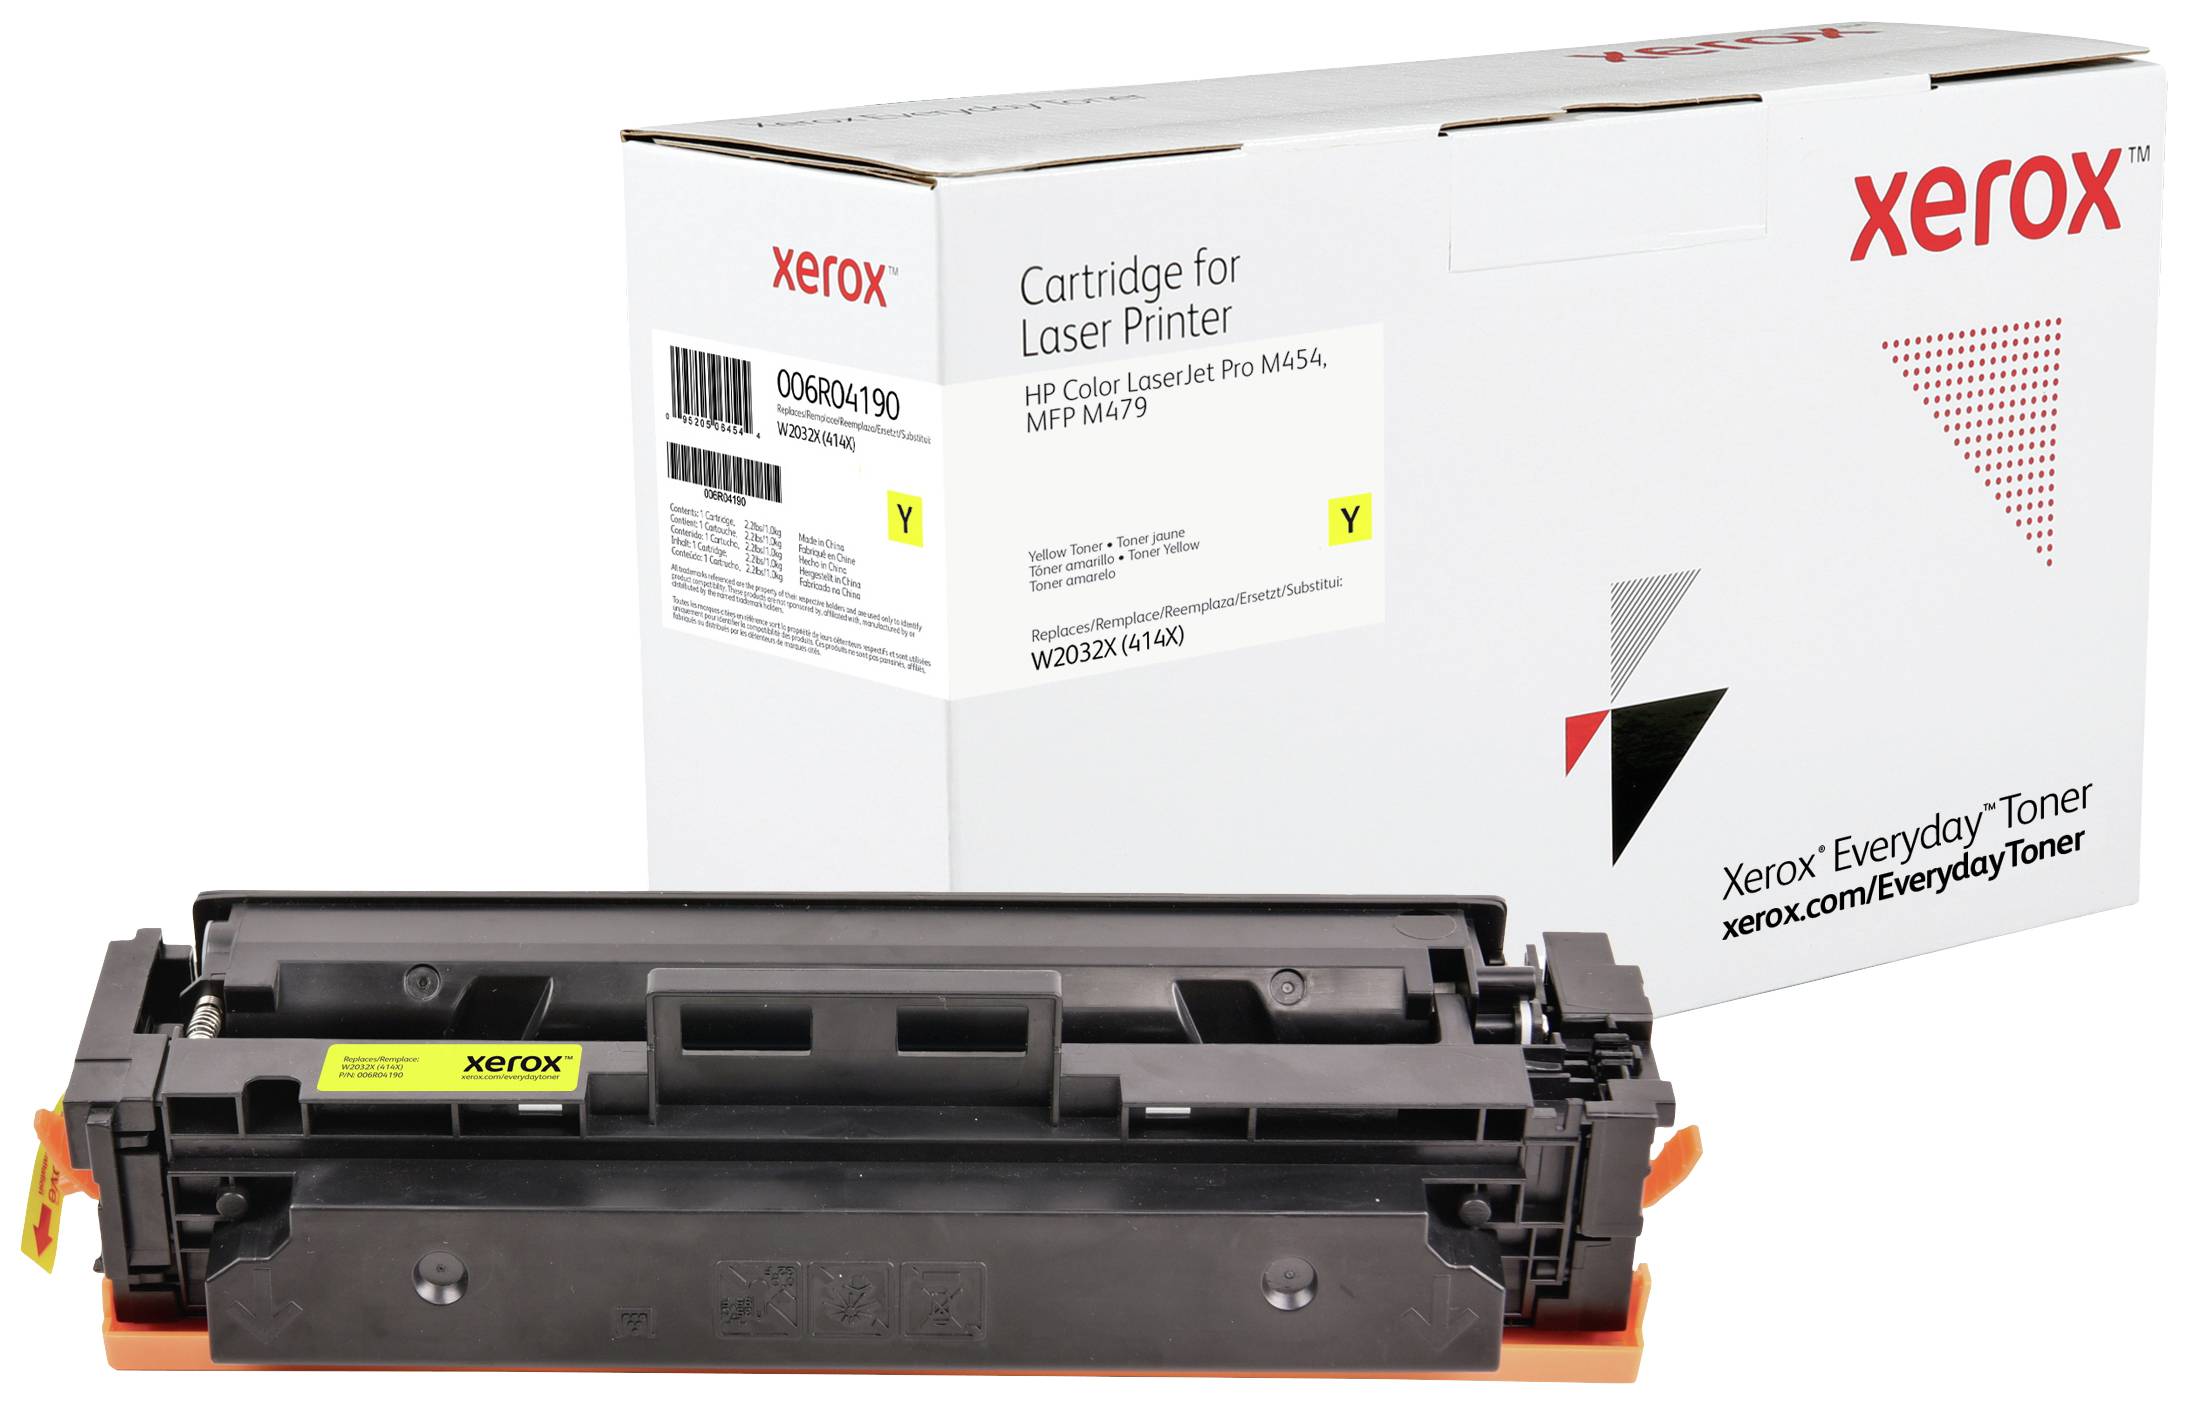 Ni bjærgning Integral Xerox Everyday Toner Single replaced HP 415X (W2032X) Yellow 6000 Sides  Compatible Toner cartridge | Conrad.com